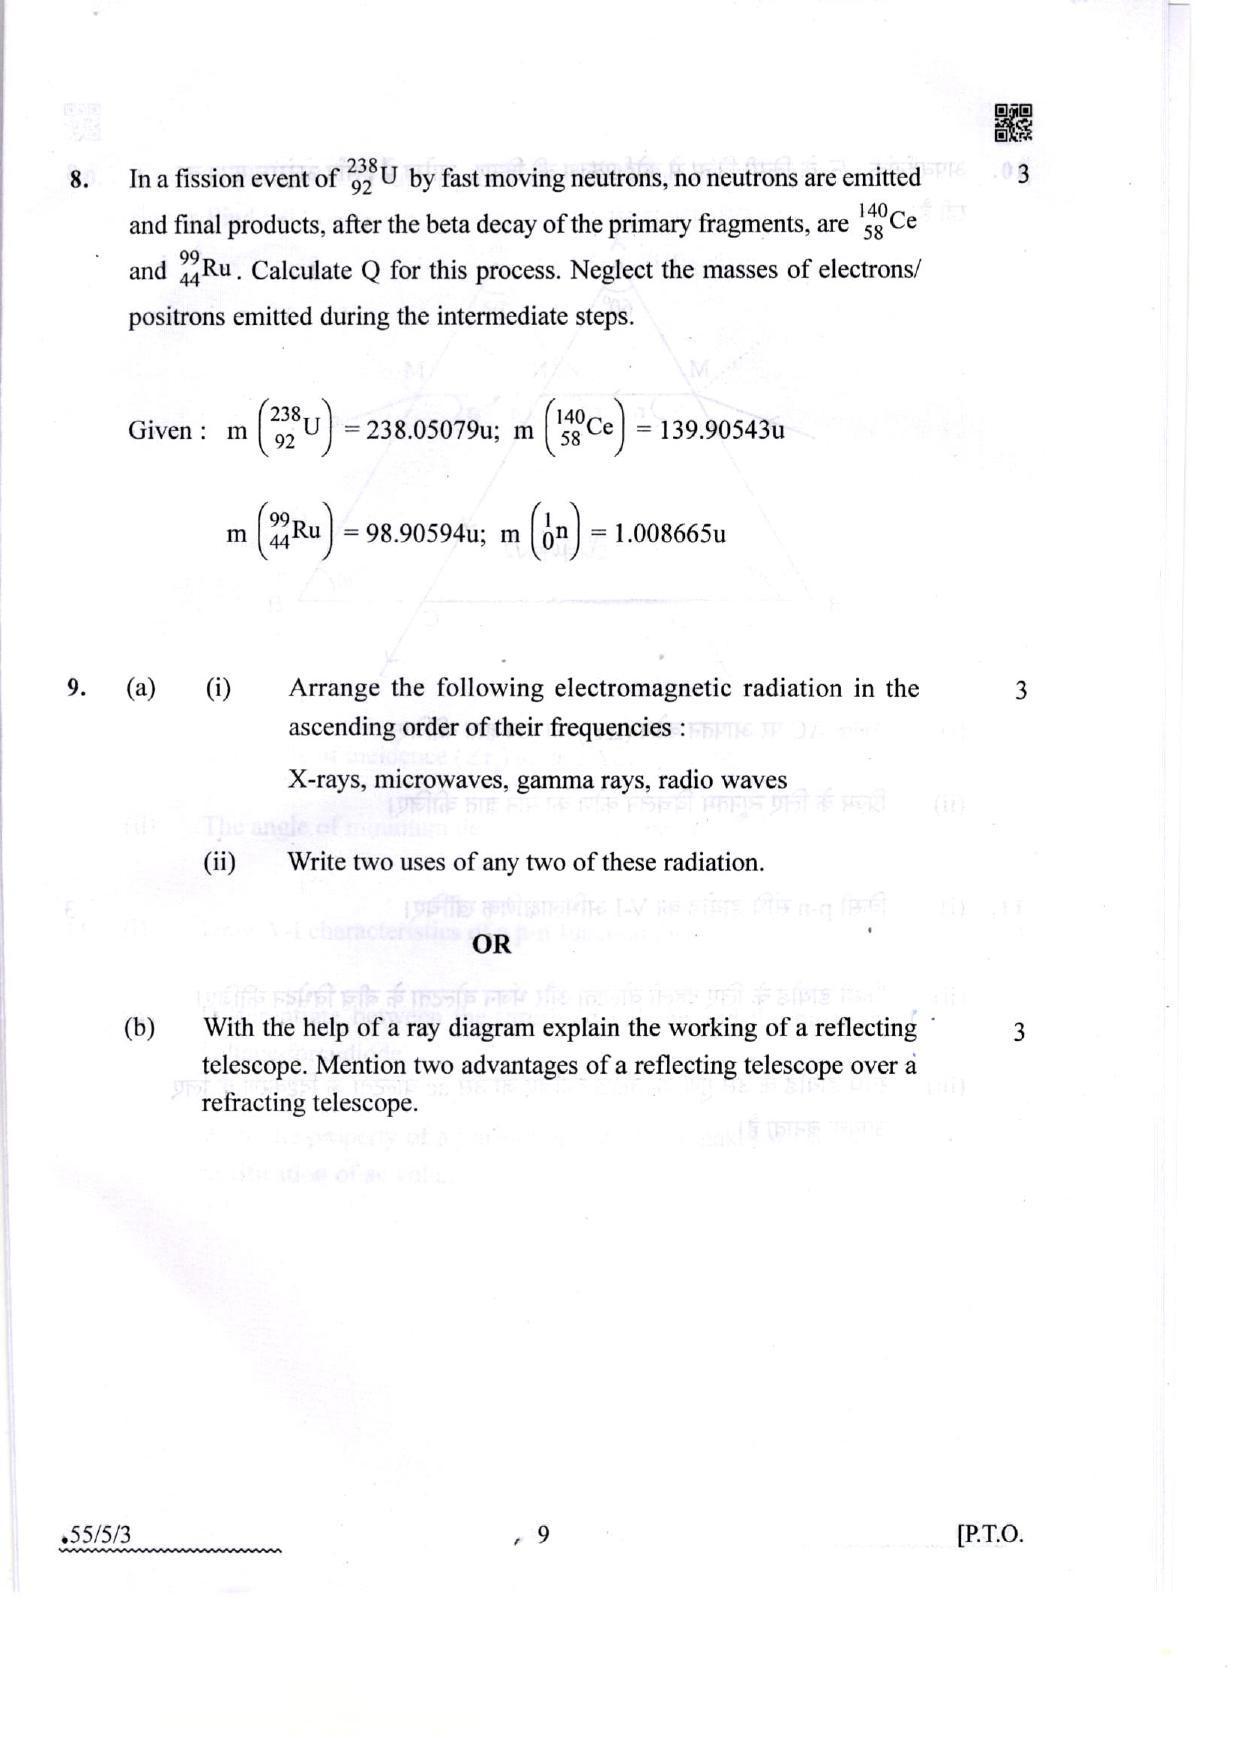 CBSE Class 12 55-5-3 Physics 2022 Question Paper - Page 9